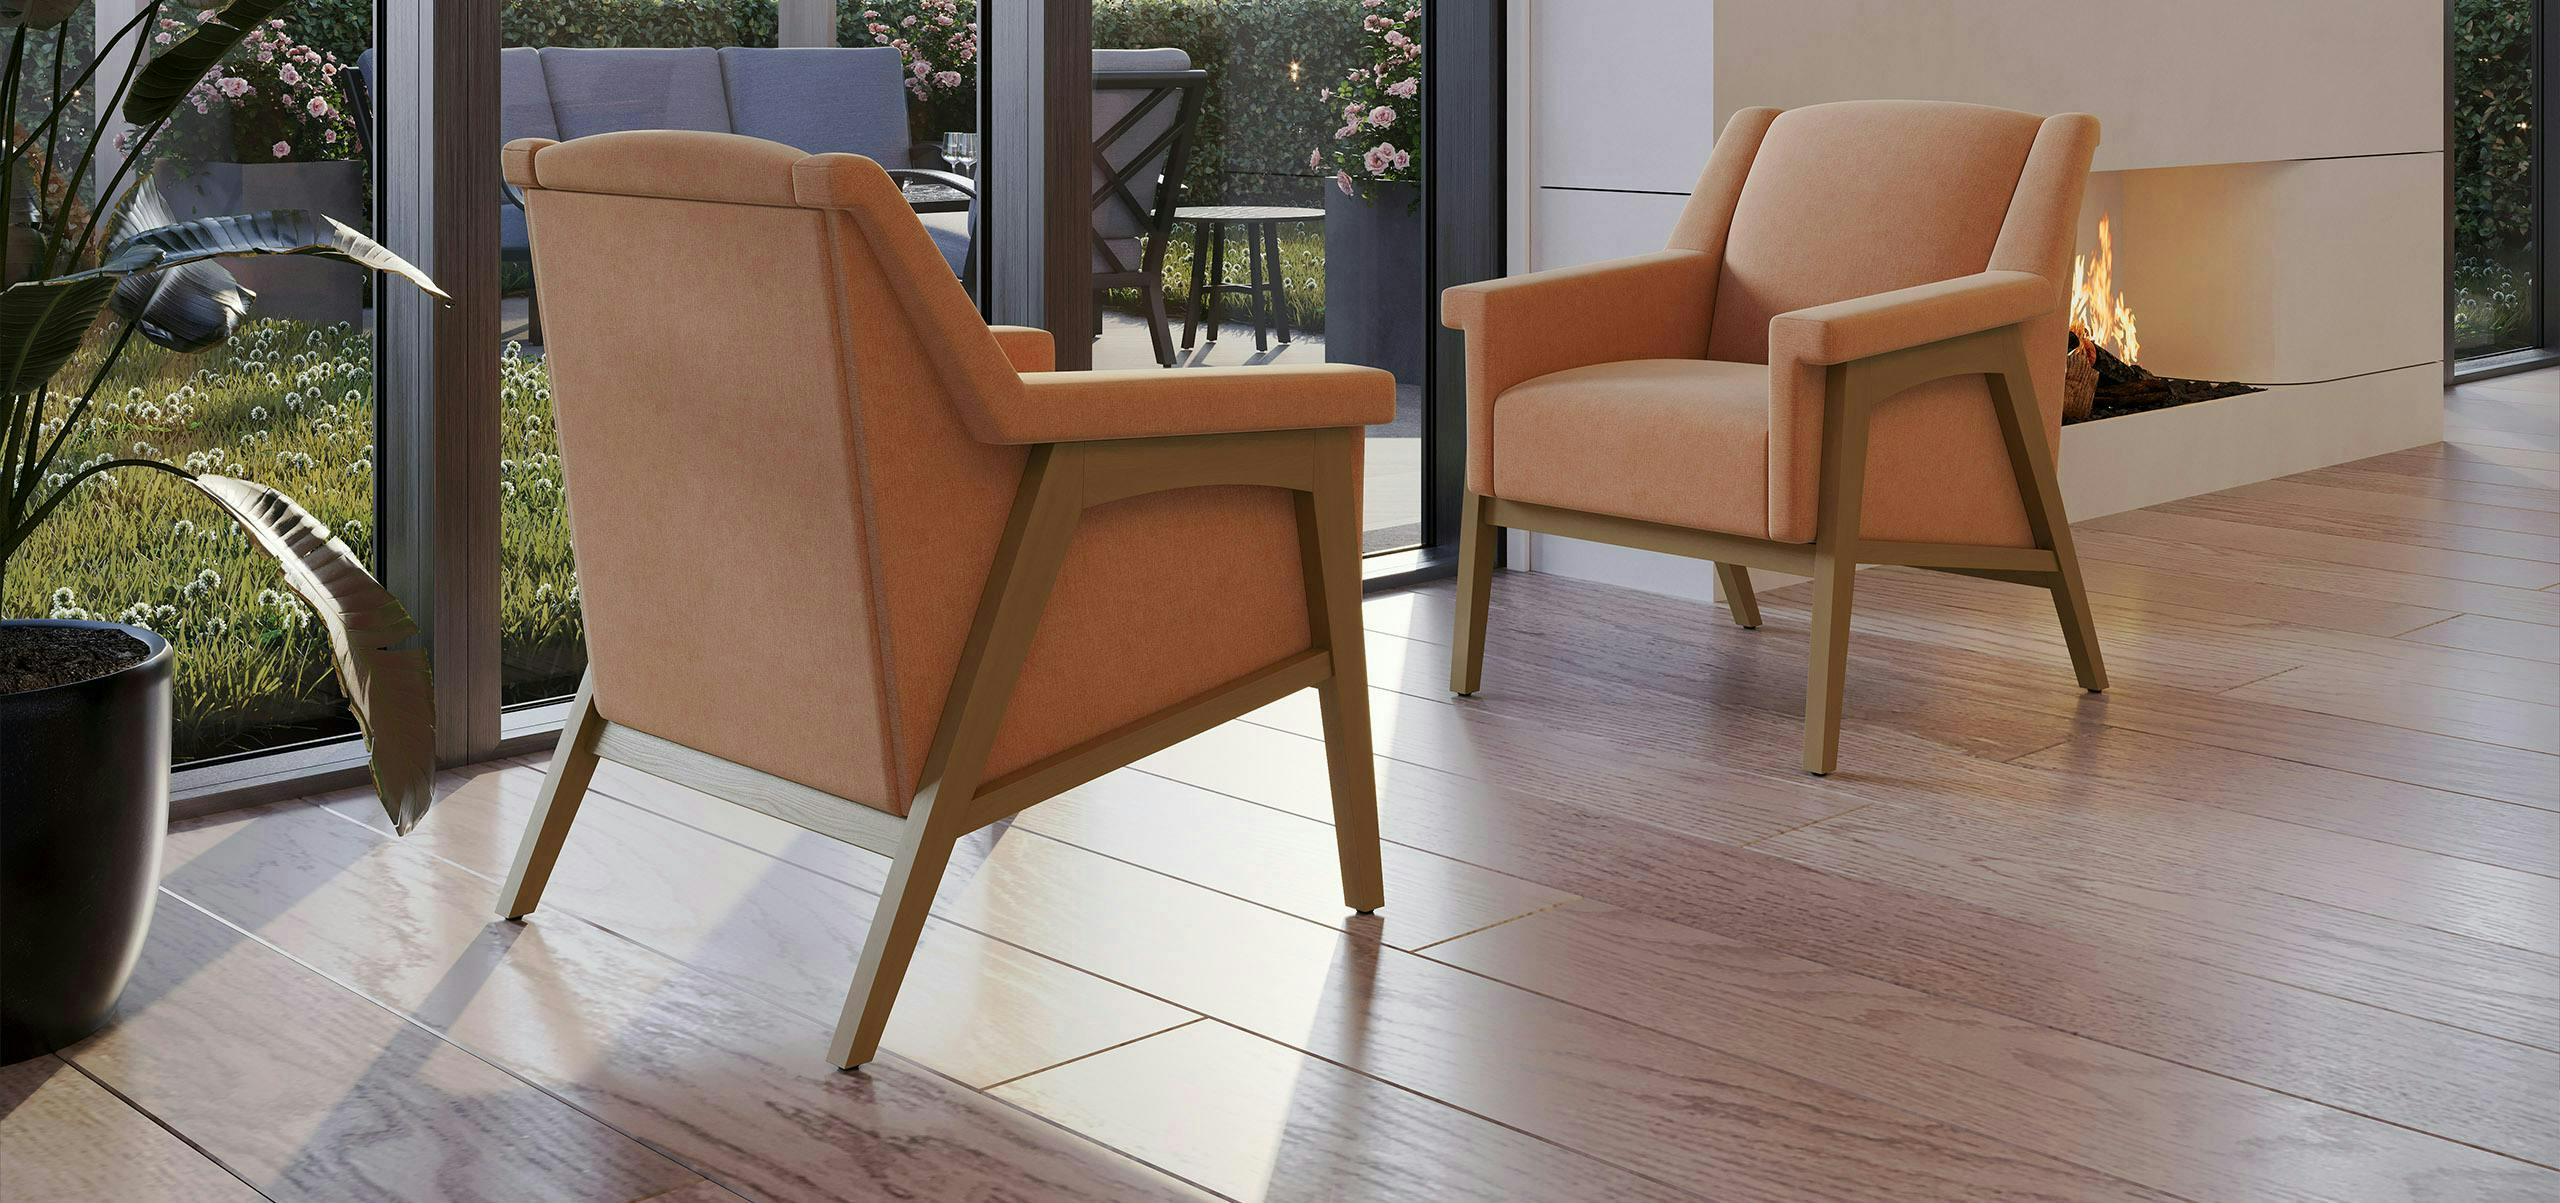 Senior Living Lobby Furniture Featuring  Lounge Chairs